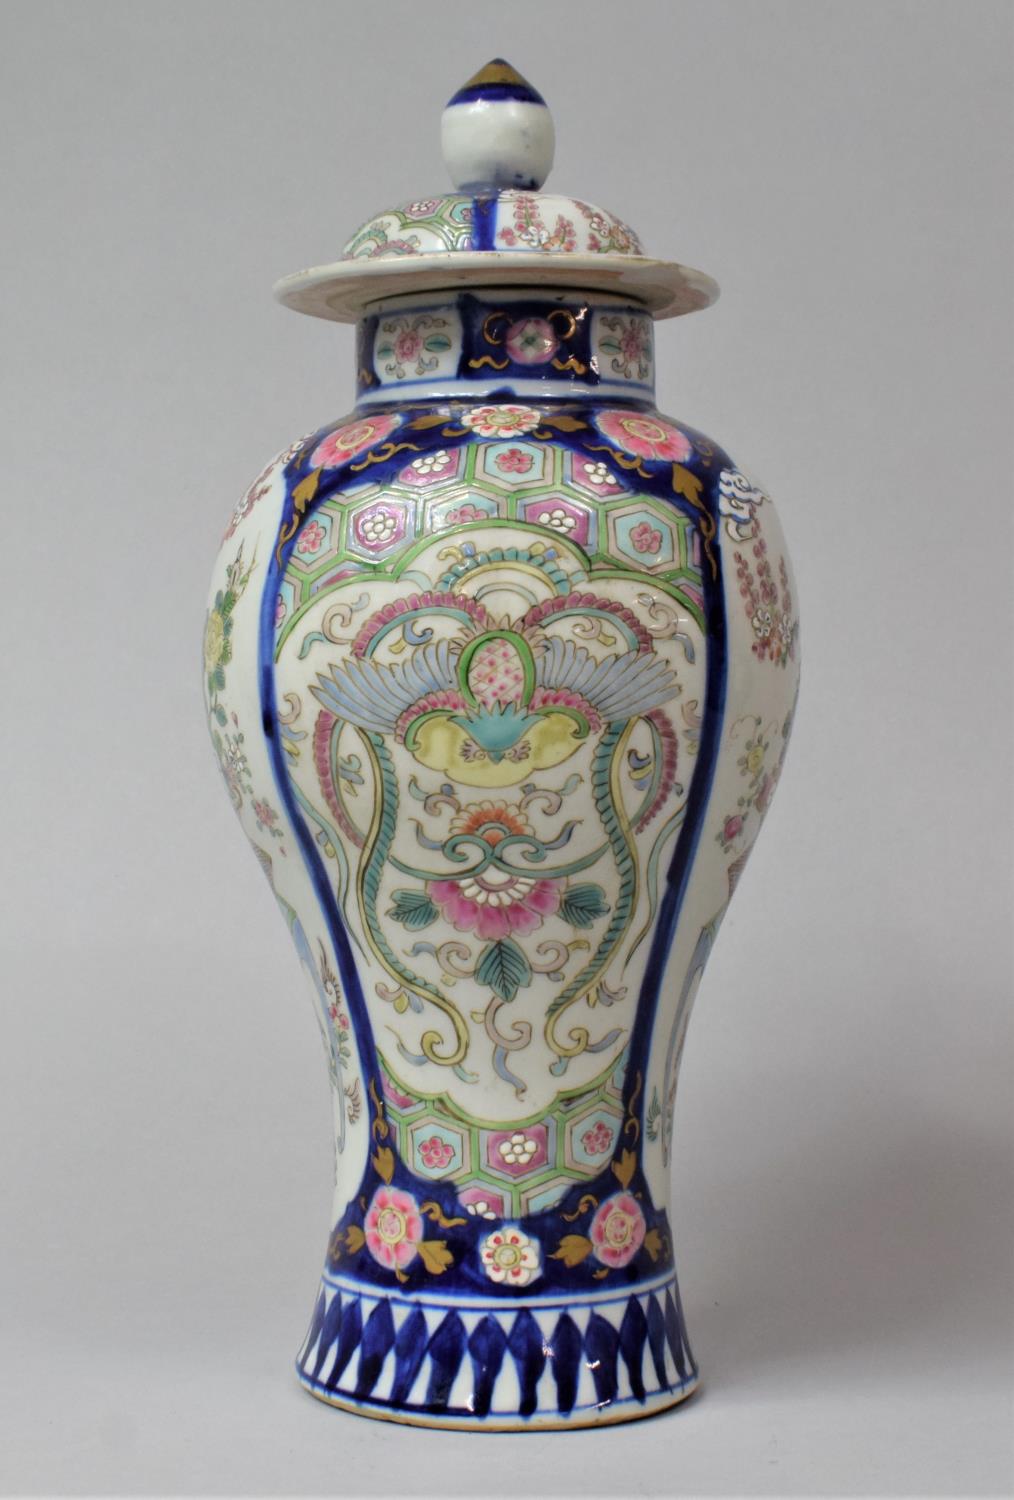 A Late 19th/Early 20th Century Chinese Lidded Vase of Balster Form Decorated Alternating Panels - Image 2 of 6